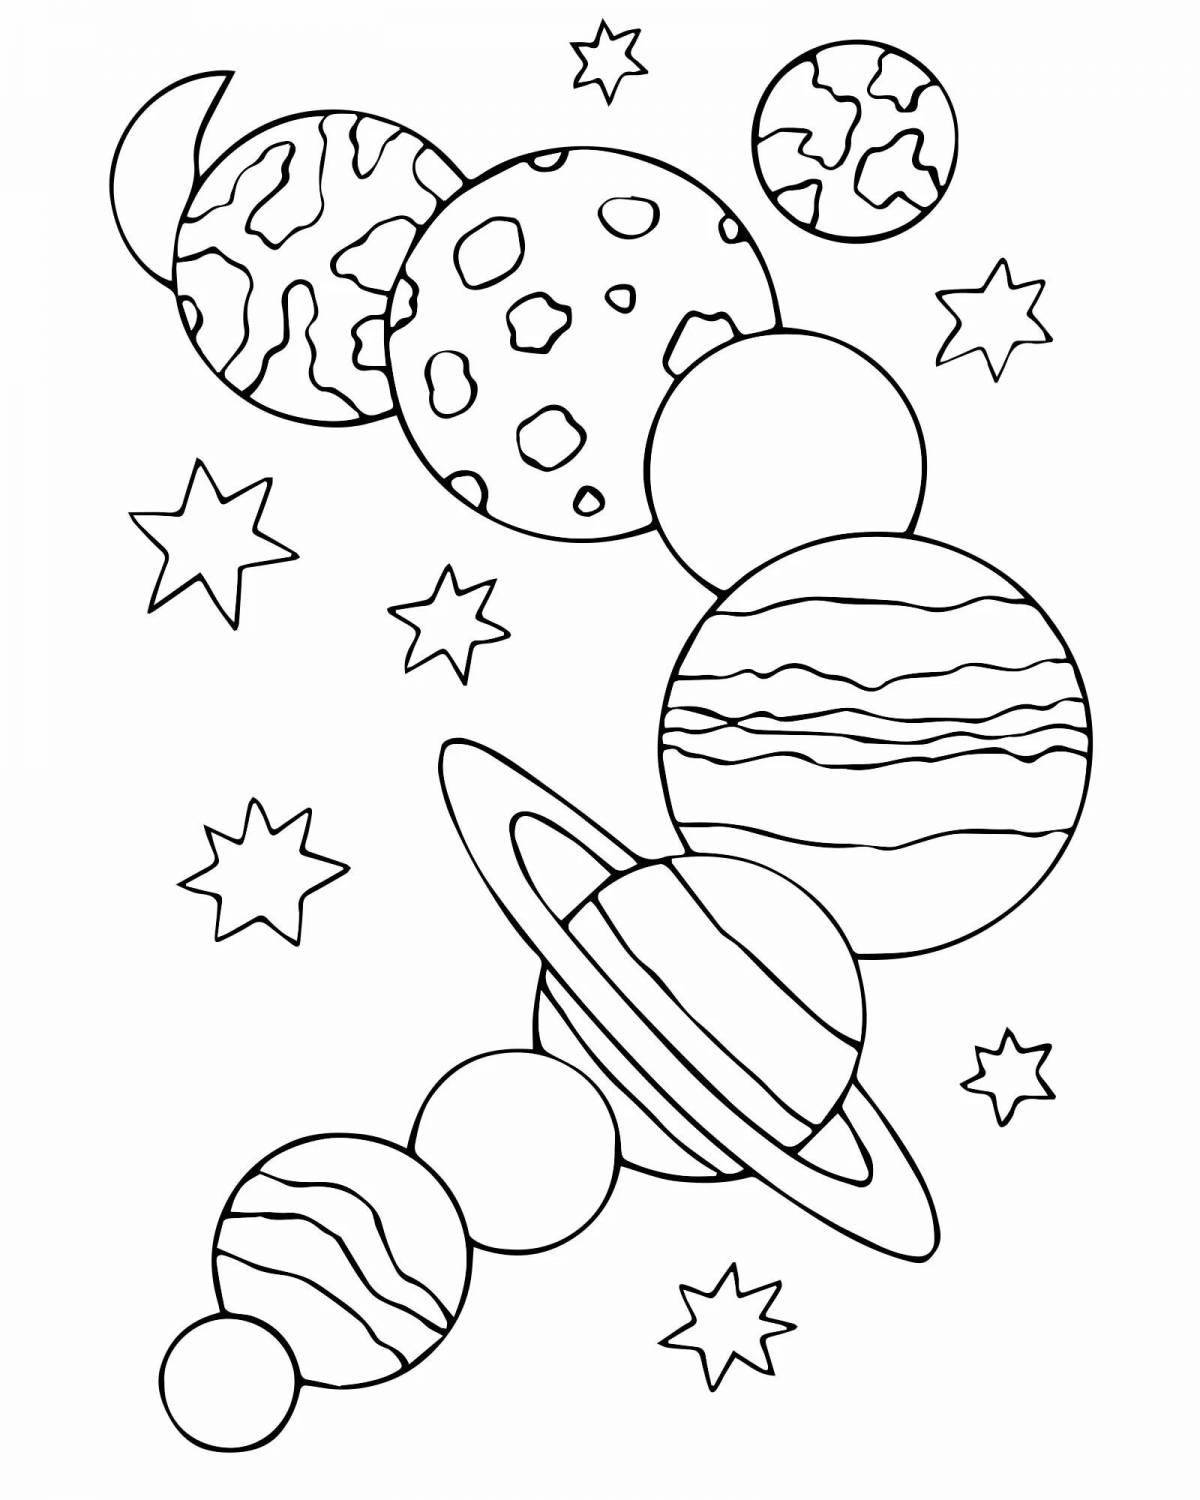 Incredible space and planet coloring for kids